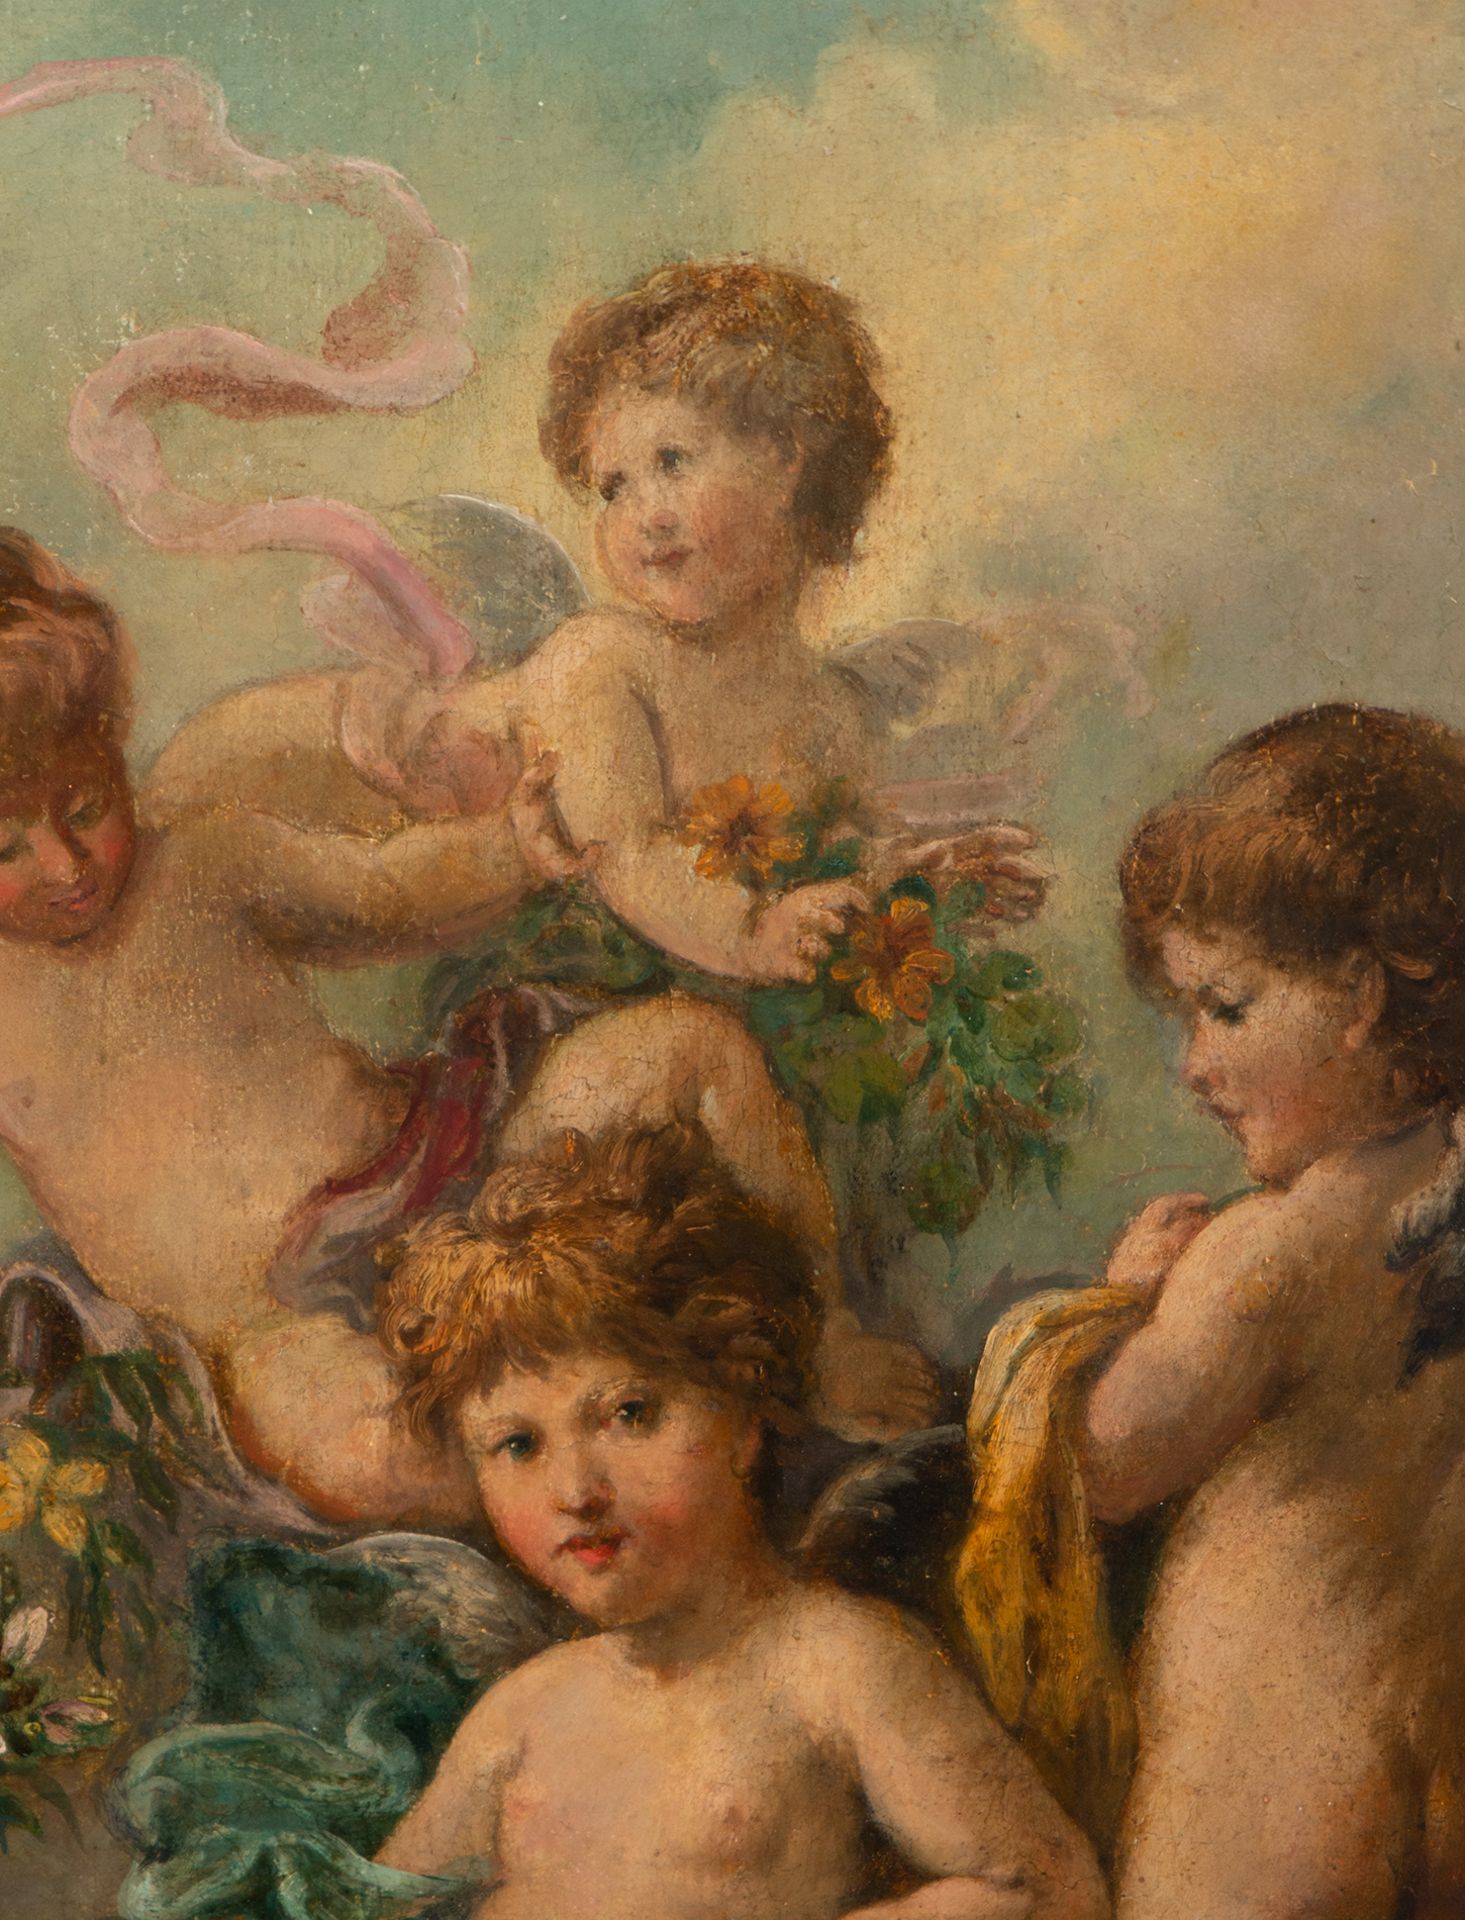 Five Cupids in Garden with Flowers, 19th century English romanticist school - Image 5 of 6